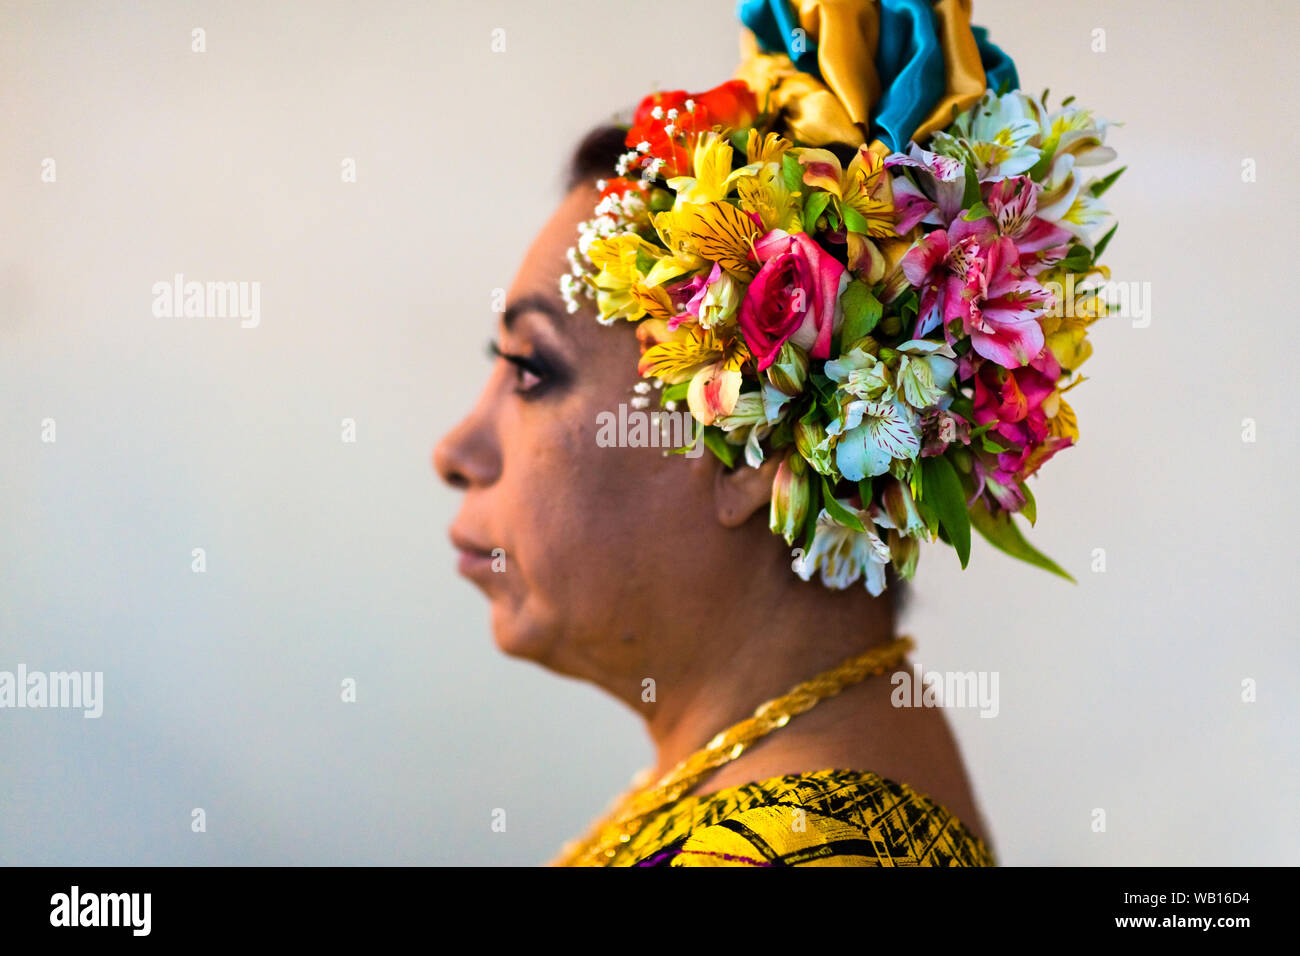 A Mexican “muxe” (typically, a homosexual man wearing female clothes) checks out a headband during the festival in Juchitán de Zaragoza, Mexico. Stock Photo